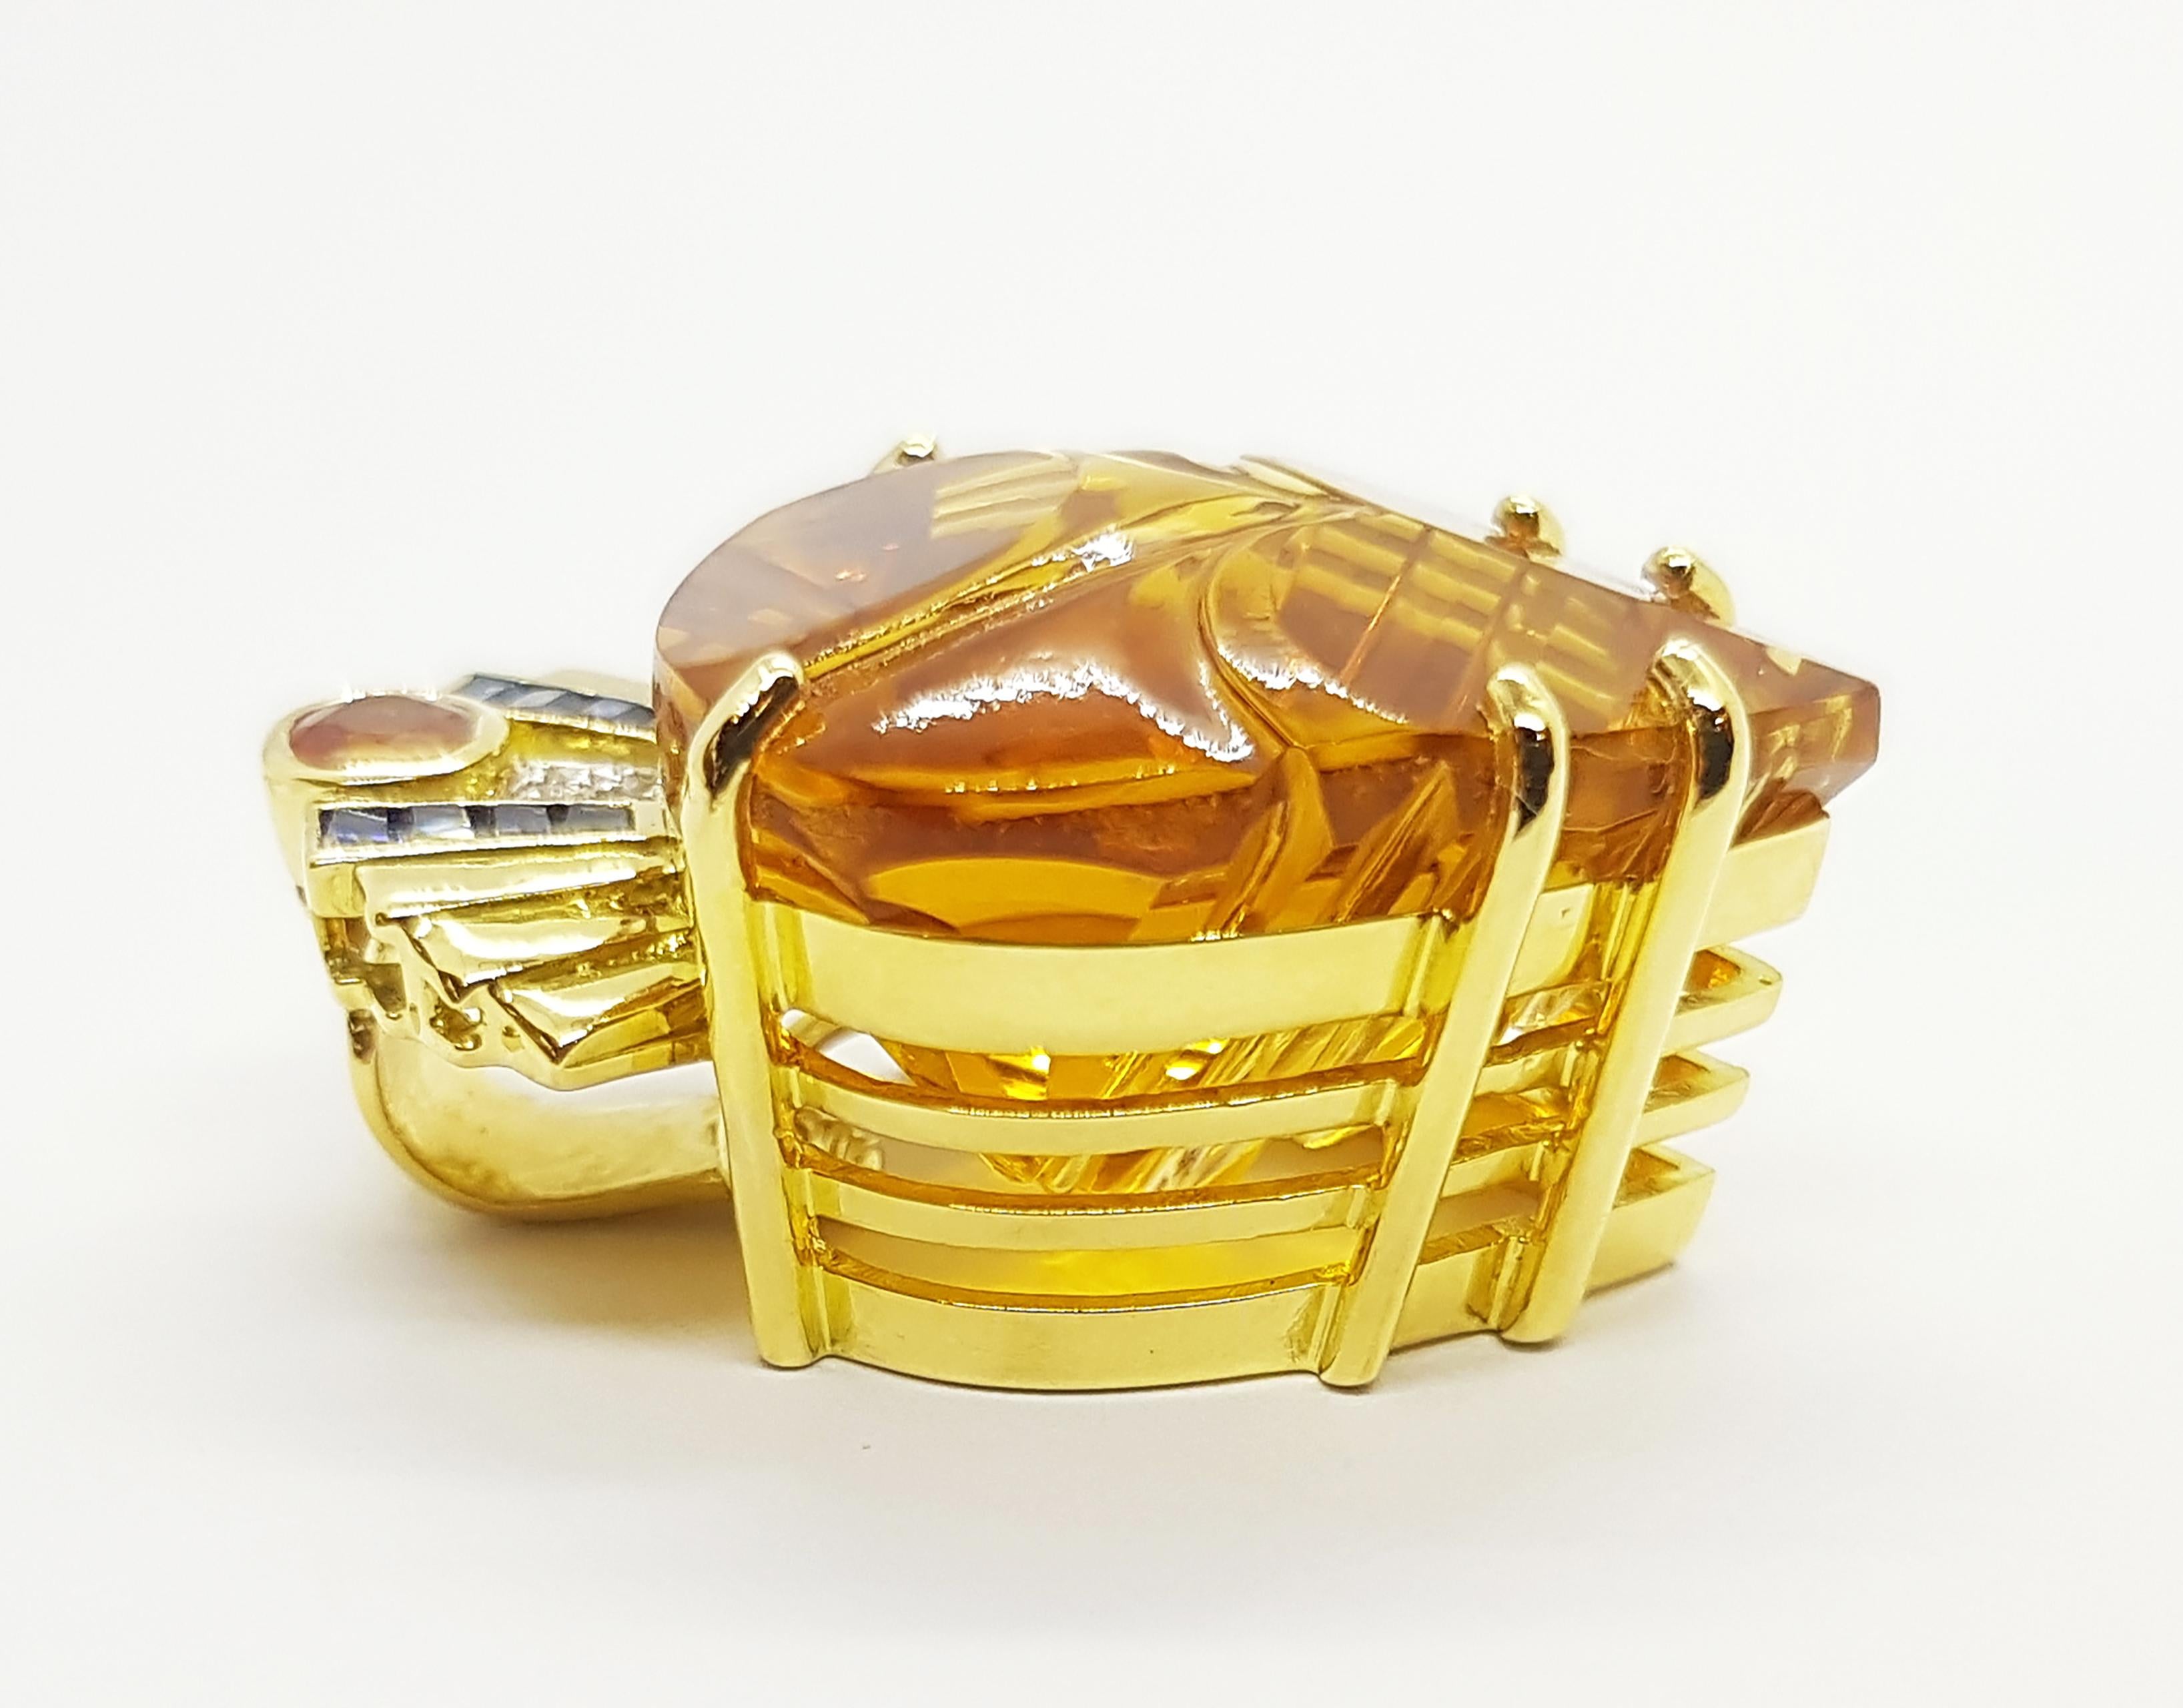 Citrine 32.49 carats with Diamond 0.05 carat, Yellow Sapphire 0.73 carat and Blue Sapphire 0.66 carat Pendant set in 18 Karat Gold Settings
(chain not included)

Width:  2.0 cm 
Length: 30 cm
Total Weight: 15.56 grams

